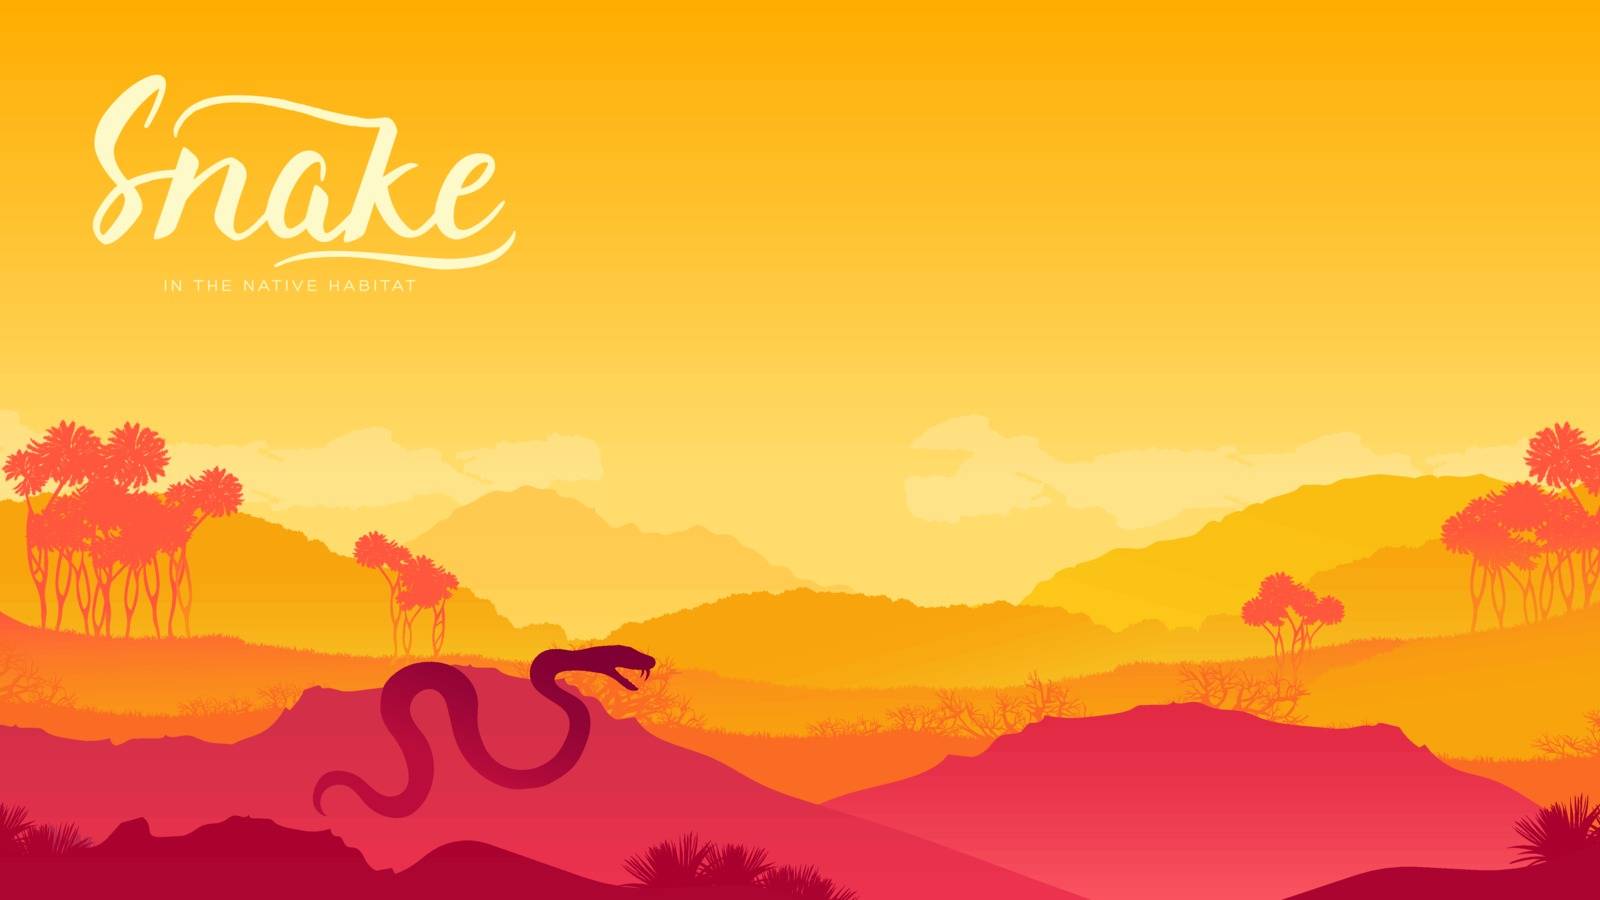 Snake climbed out to bask in the sun background. Dangerous predator in the desert traces a victim design. Reptile to prepare for attack illustration.  by Linetale